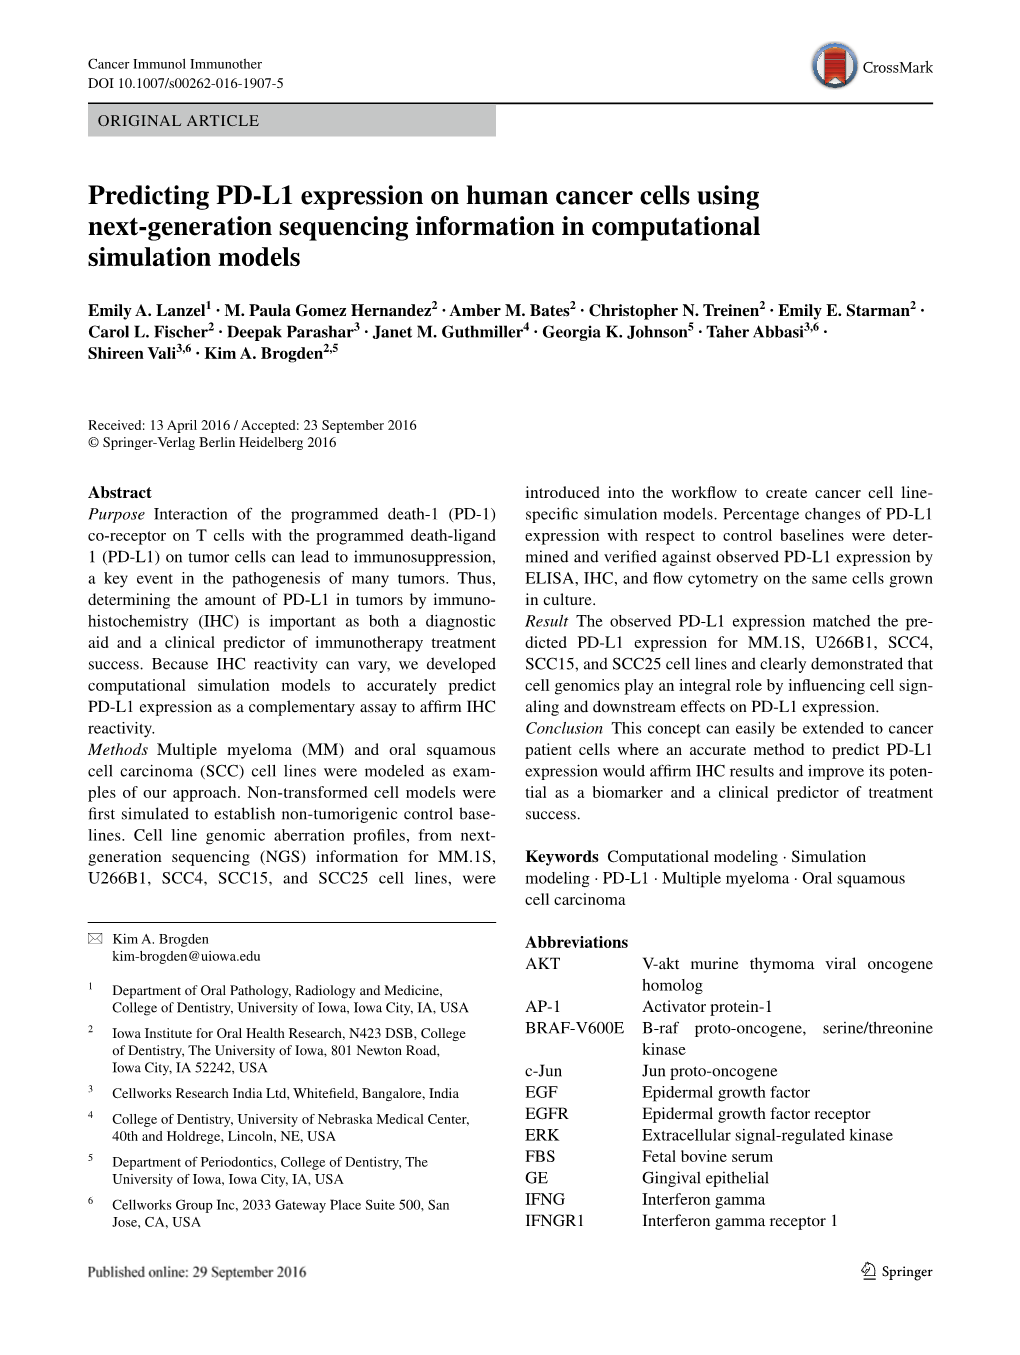 Predicting PD-L1 Expression on Human Cancer Cells Using Next